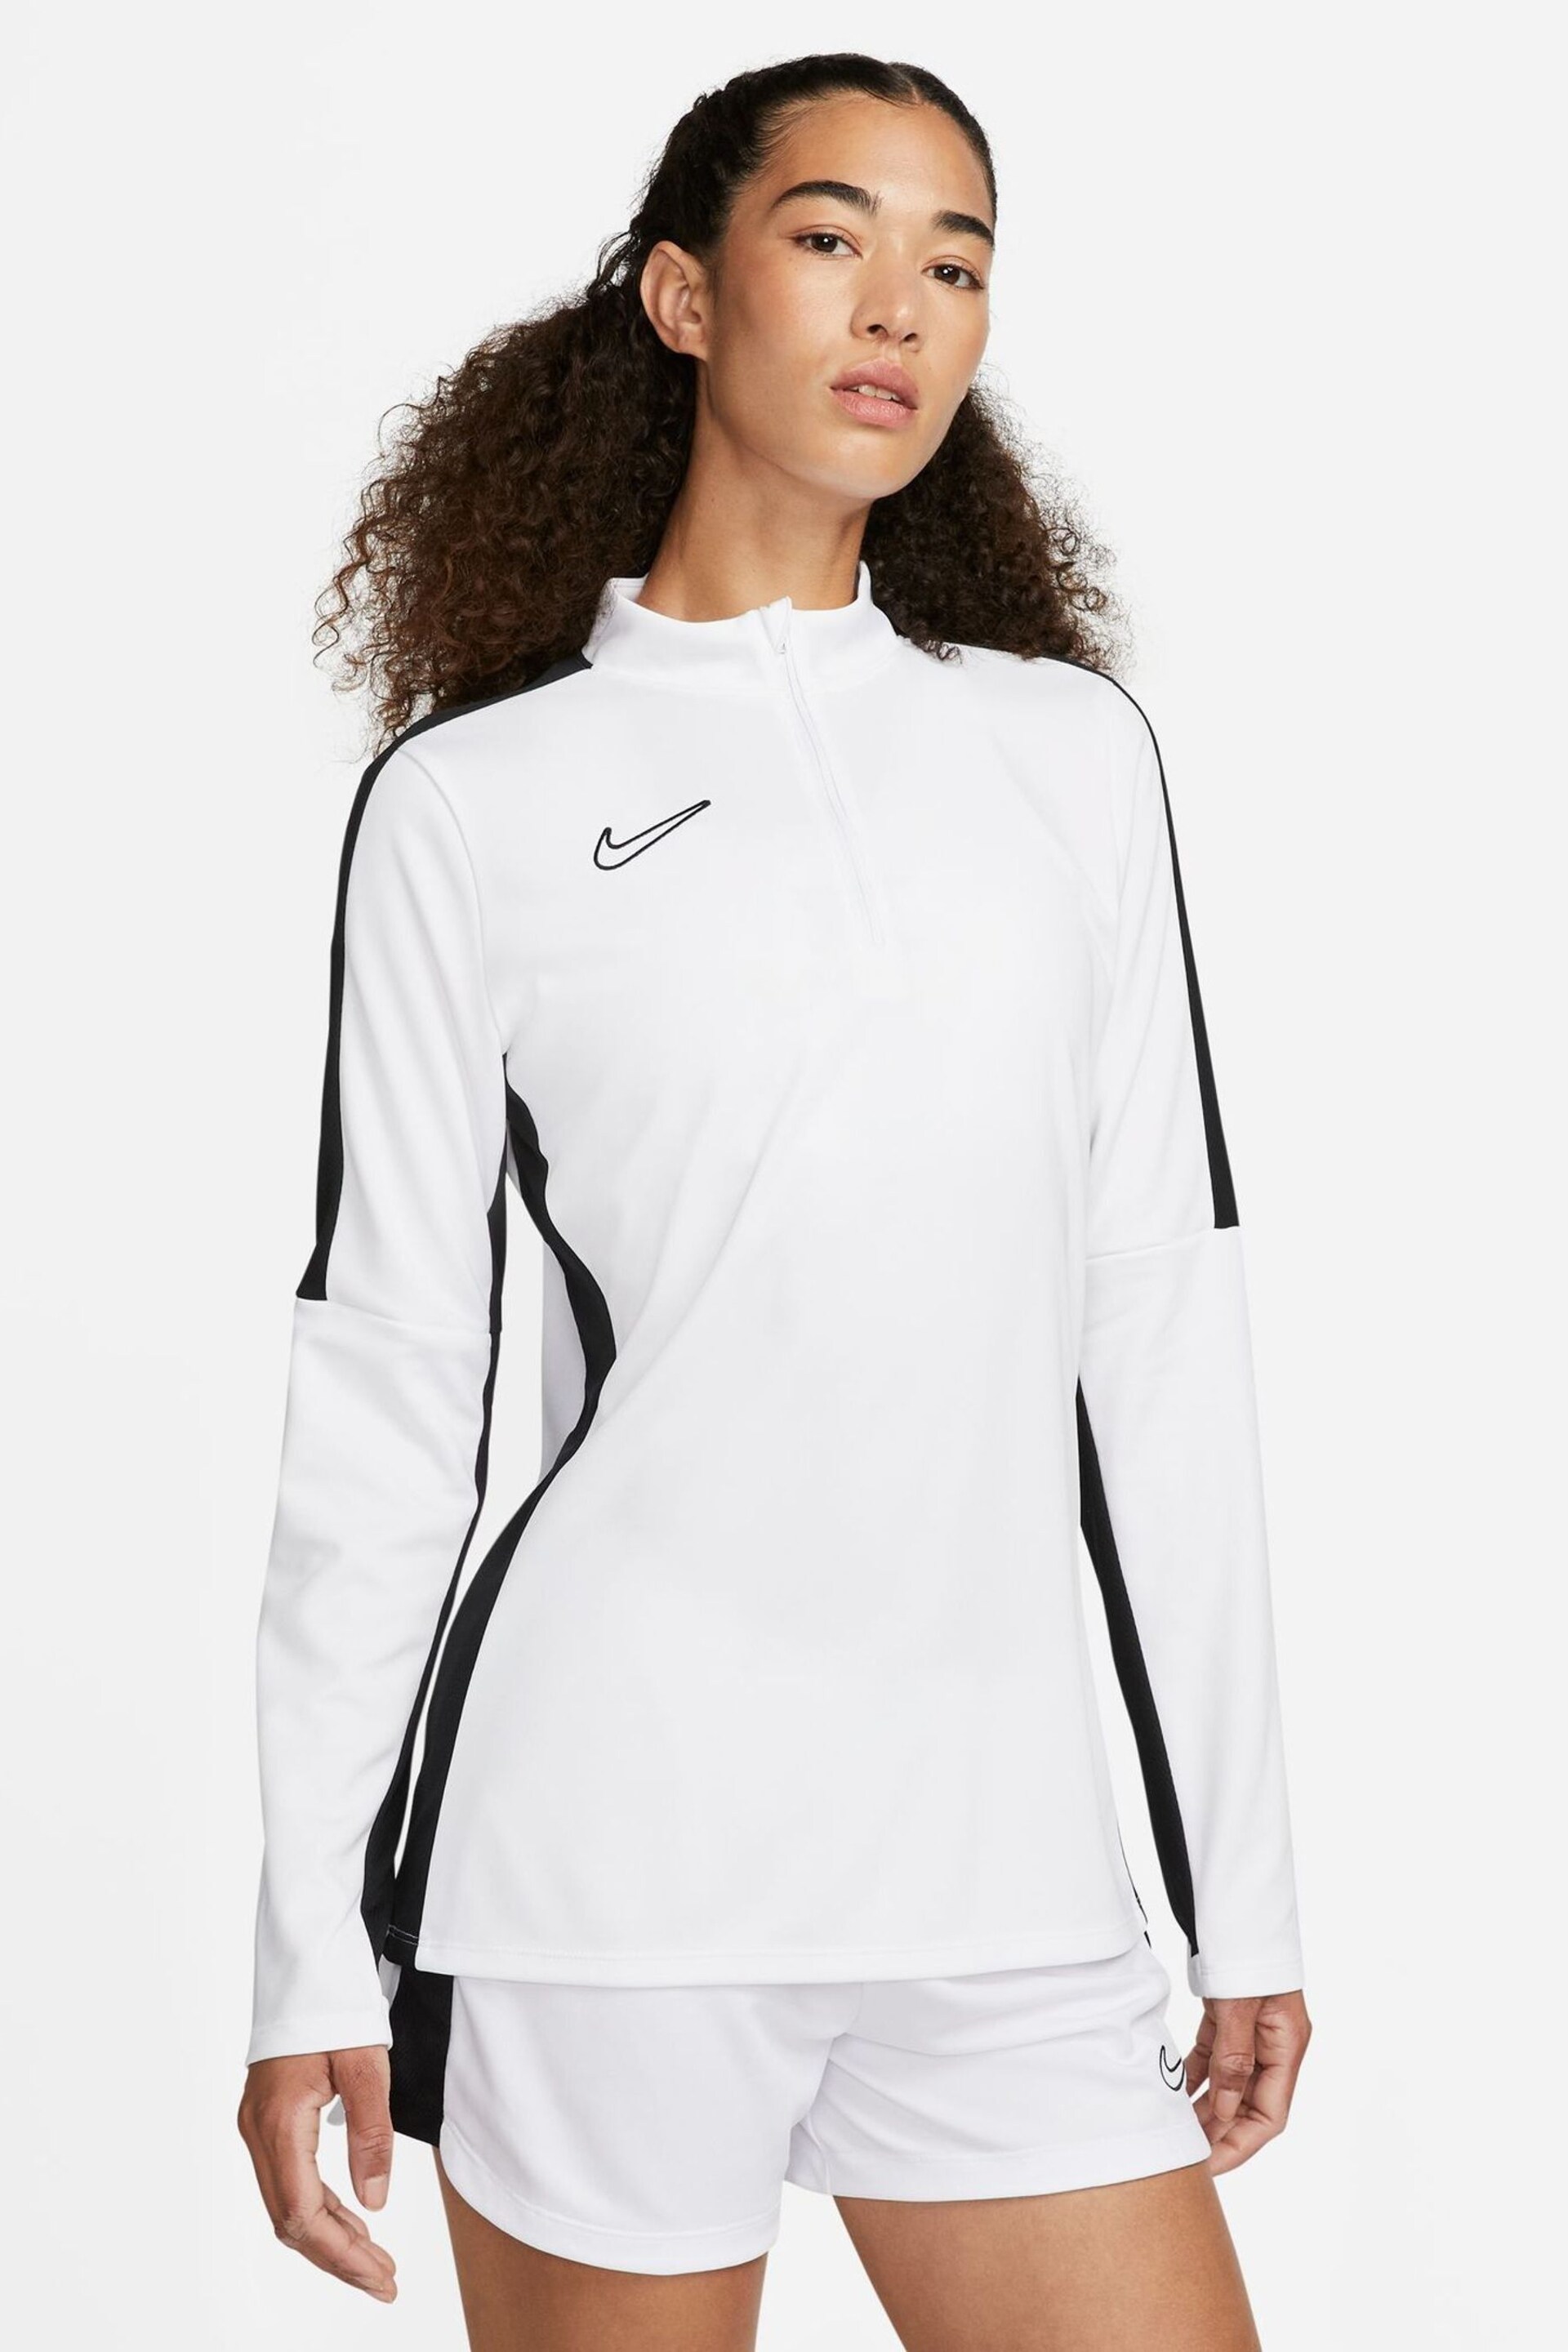 Nike White Dri-FIT Academy Drill Training Top - Image 1 of 6